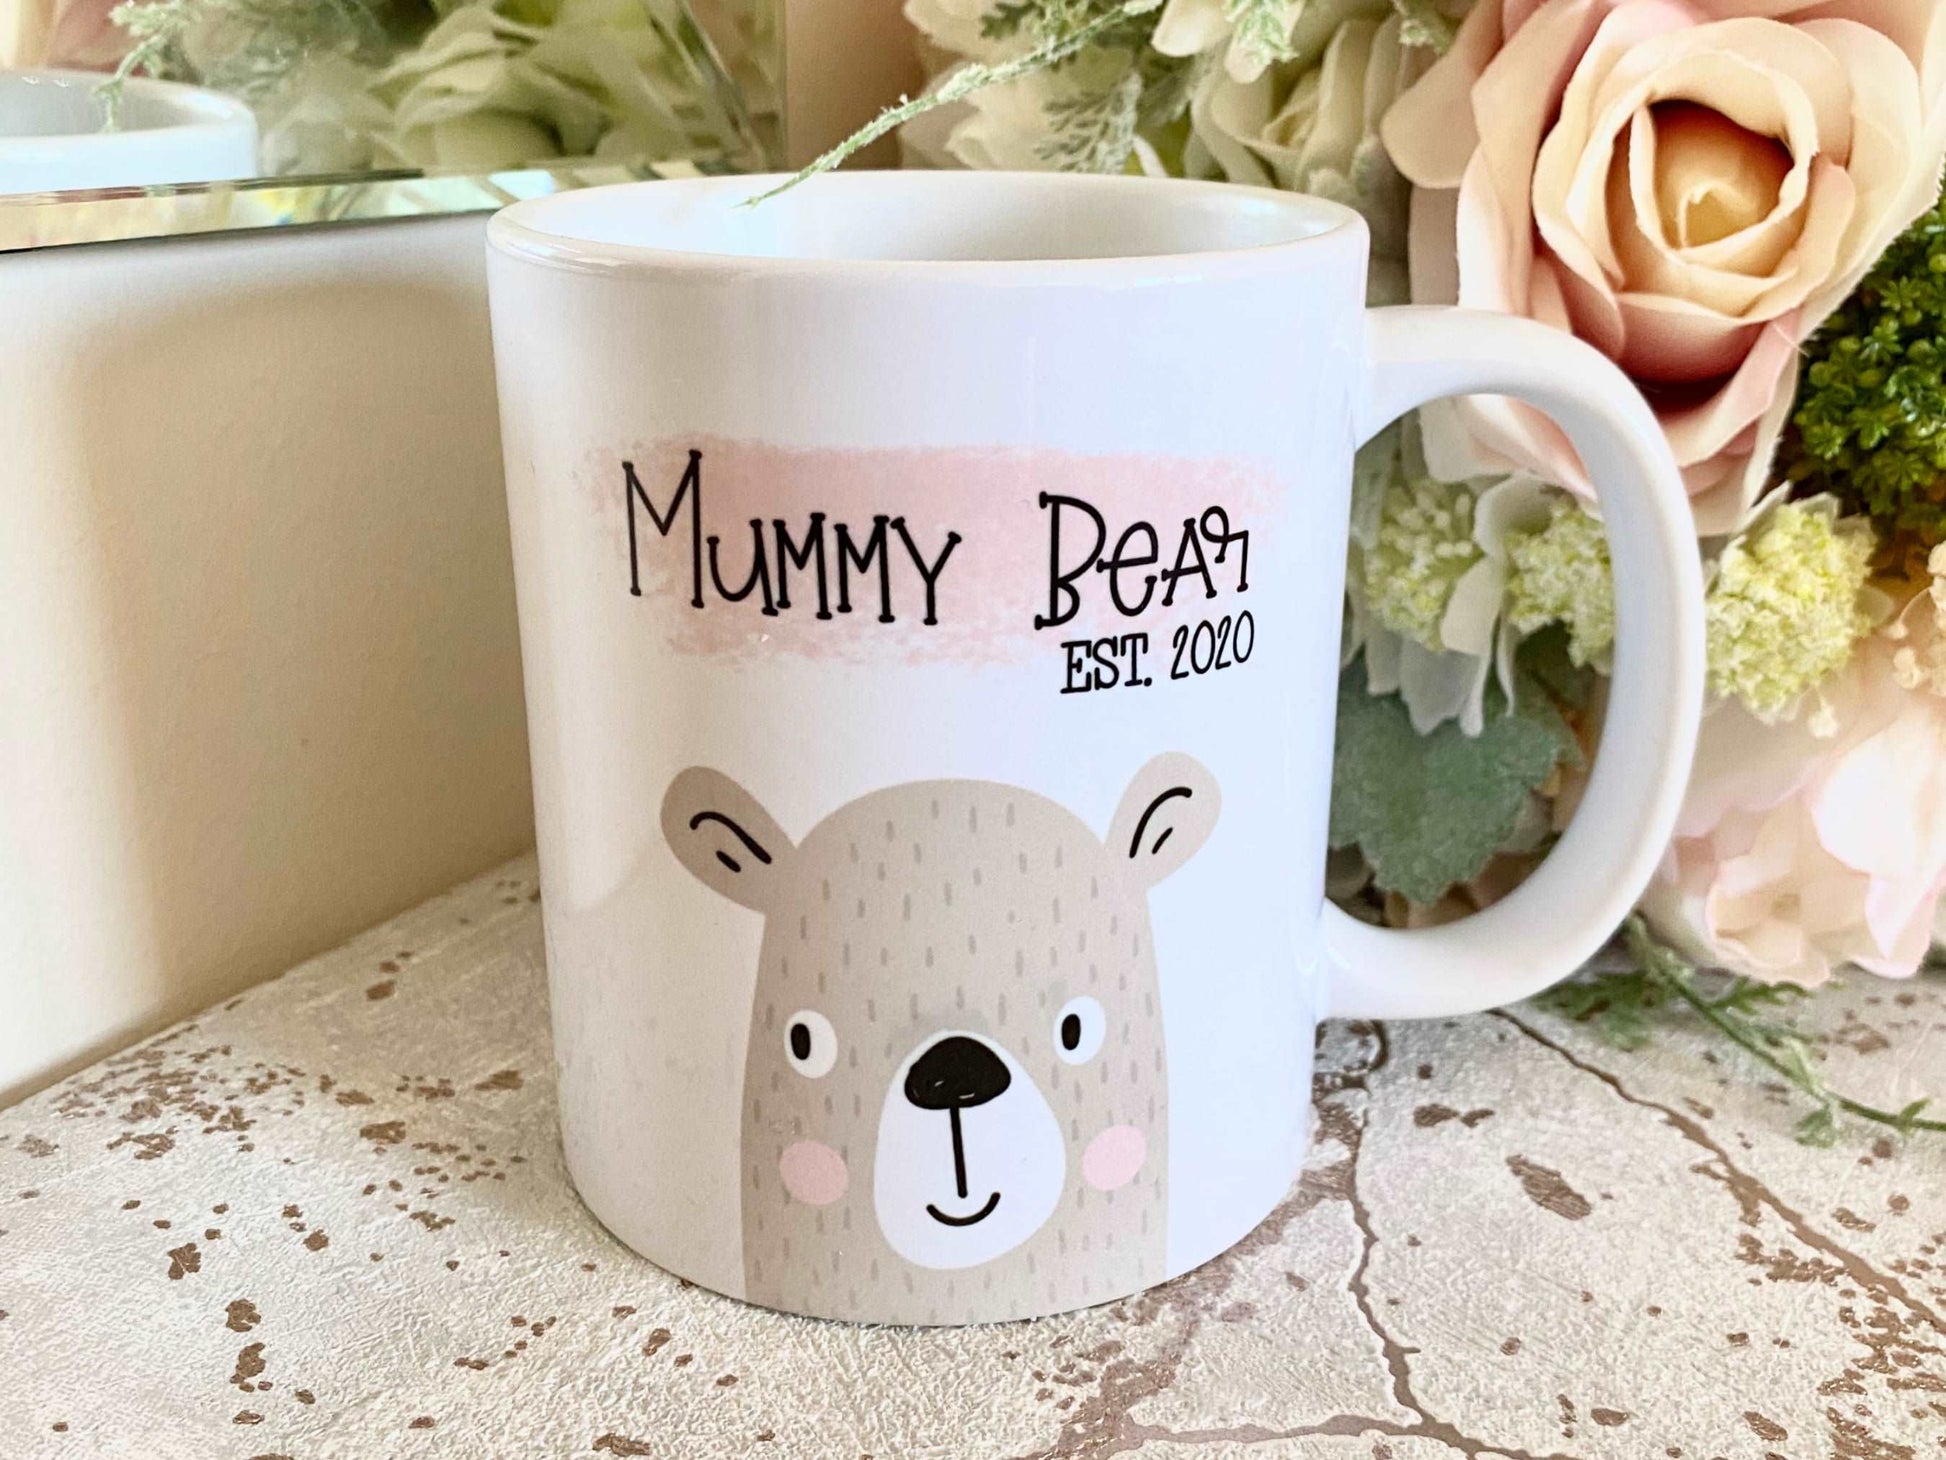 white mug with cute bear illustration printed on with the text mummy bear est. 2020 over a pink paint stroke effect smear. The mug is on a marble effect surface with flowers behind